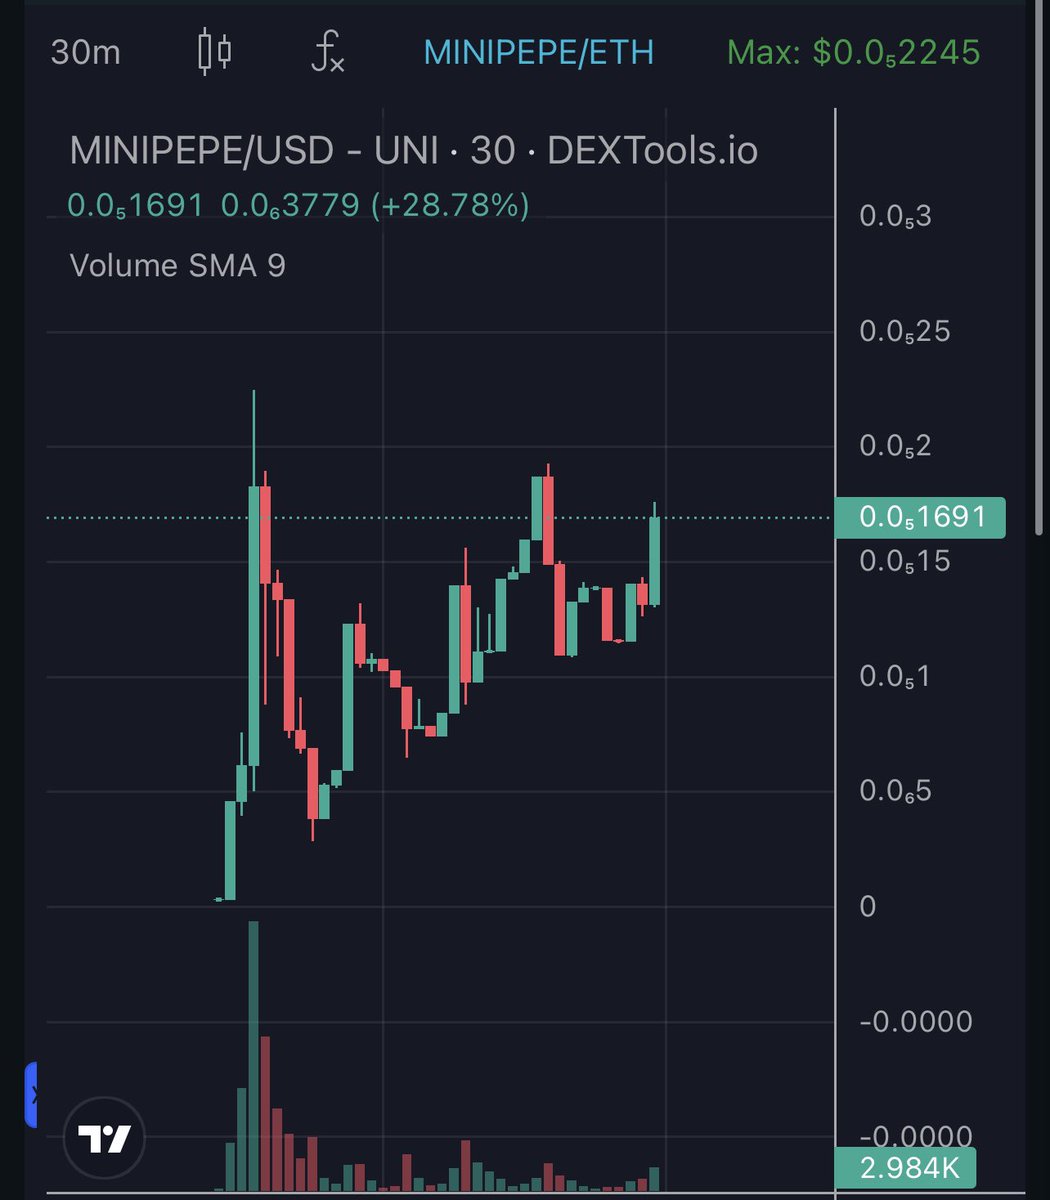 #Minipepe Holding up strong from launch yesterday, the breakout is imminent with the new $pepe pumping Chart: dextools.io/app/en/ether/p… Tg: t.me/MiniPepeETH